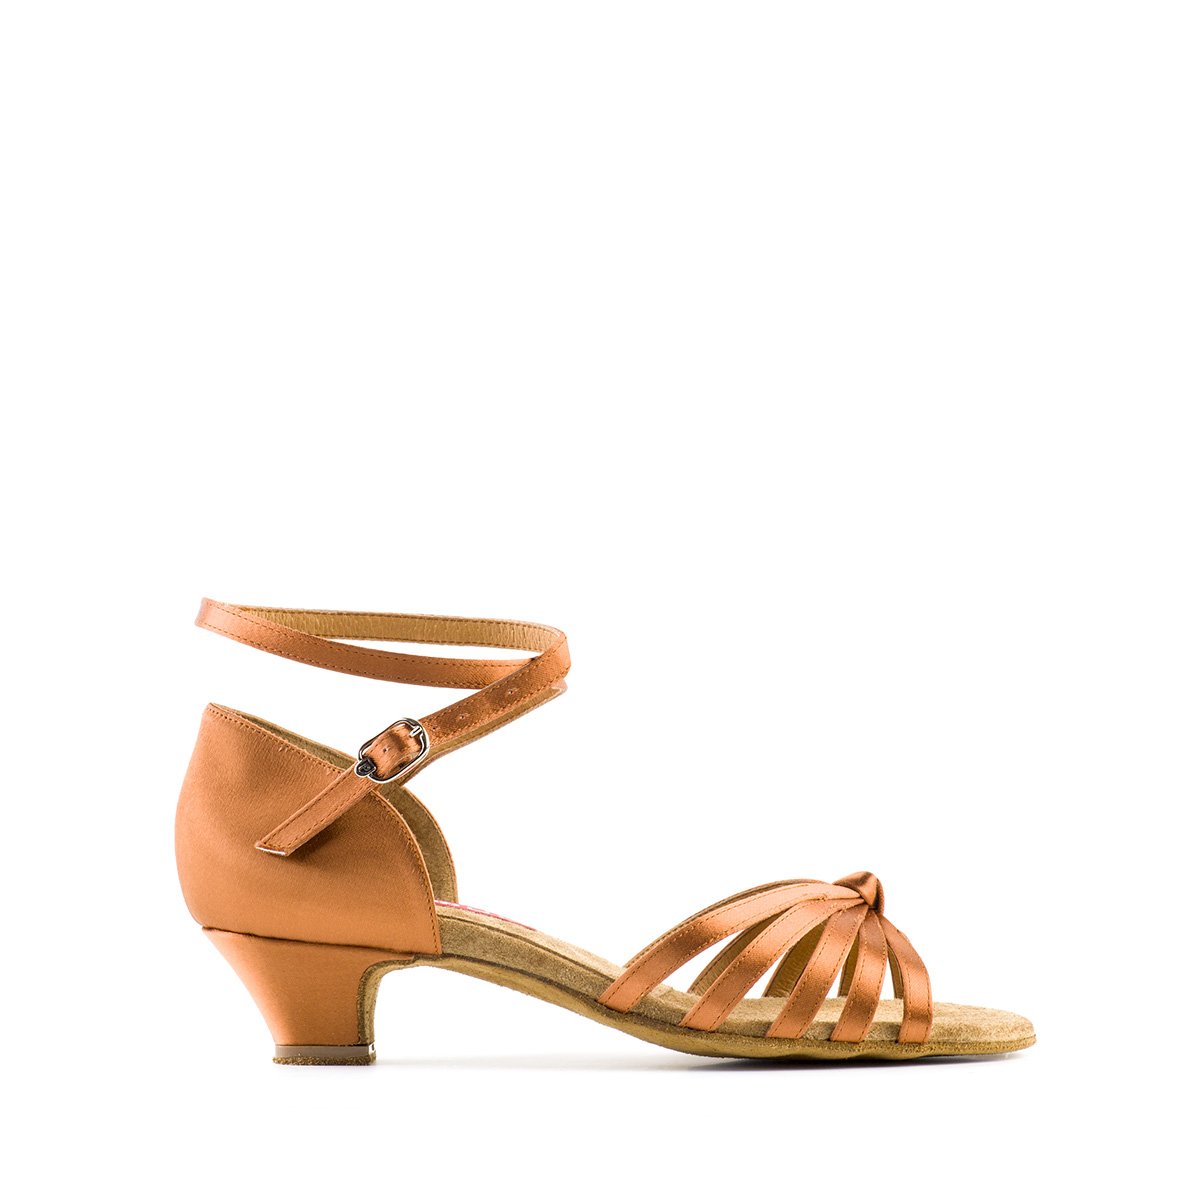 Tan Satin Ladies Latin Dance Shoe with Flare Heel and Wrap Around Ankle Cross Strap